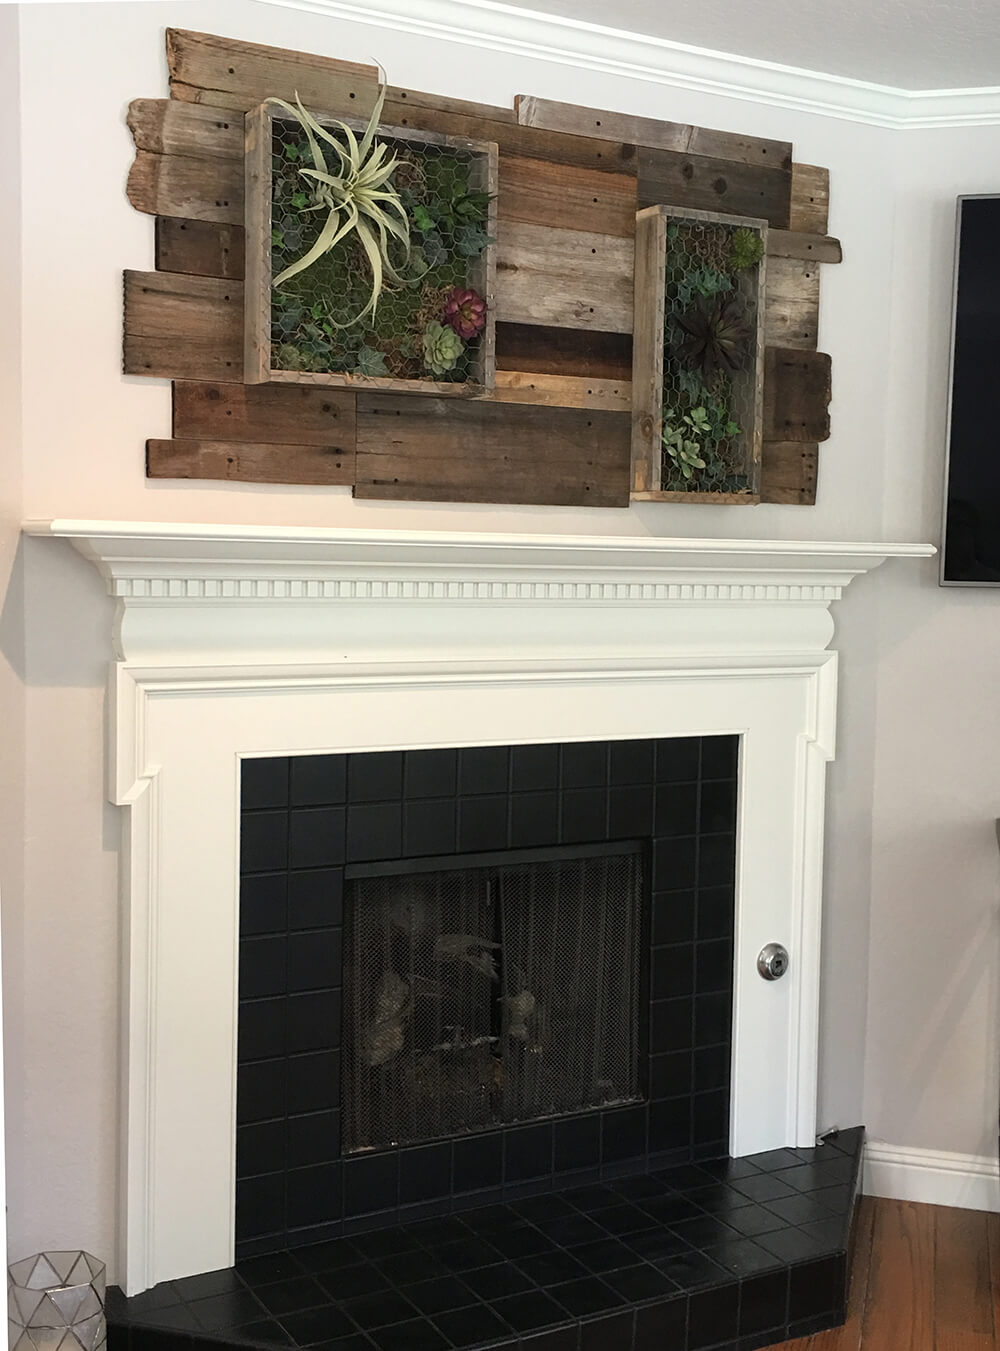 Indoor vertical wall garden created with reclaimed wood and framed succulent art. Creating a dynamic living wall.